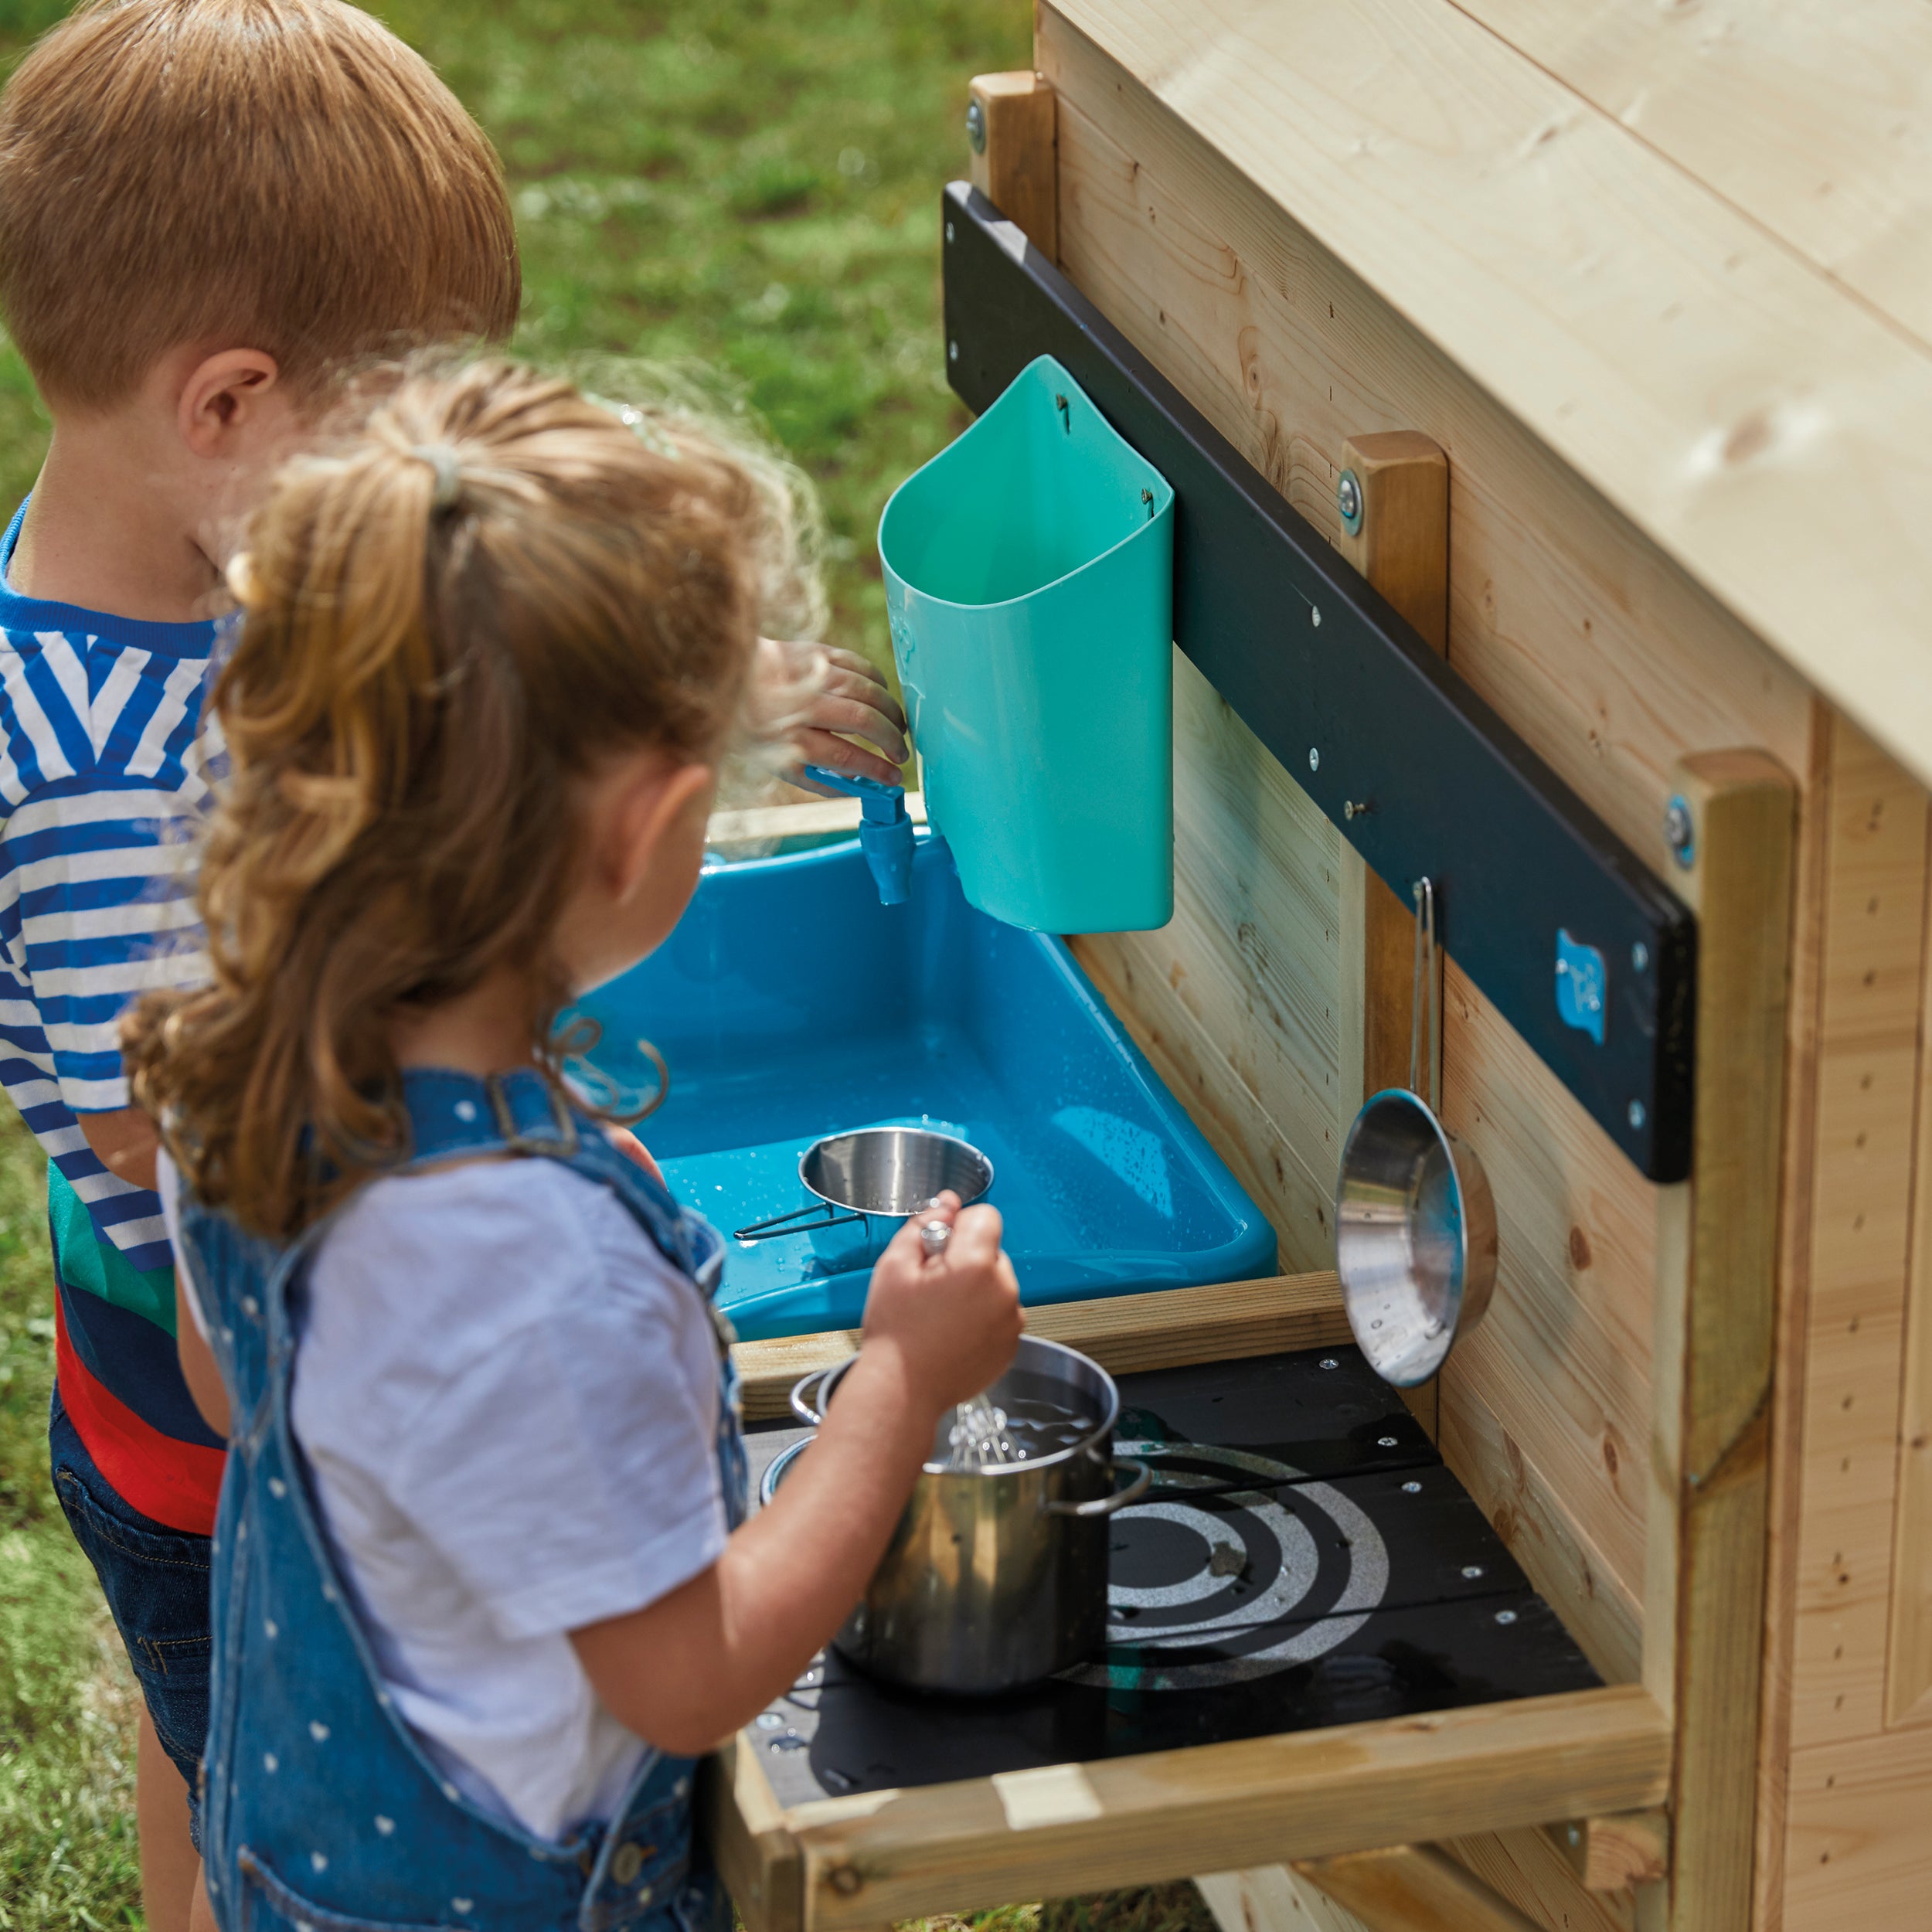 TP297 Deluxe Mud Kitchen Playhouse Accessory